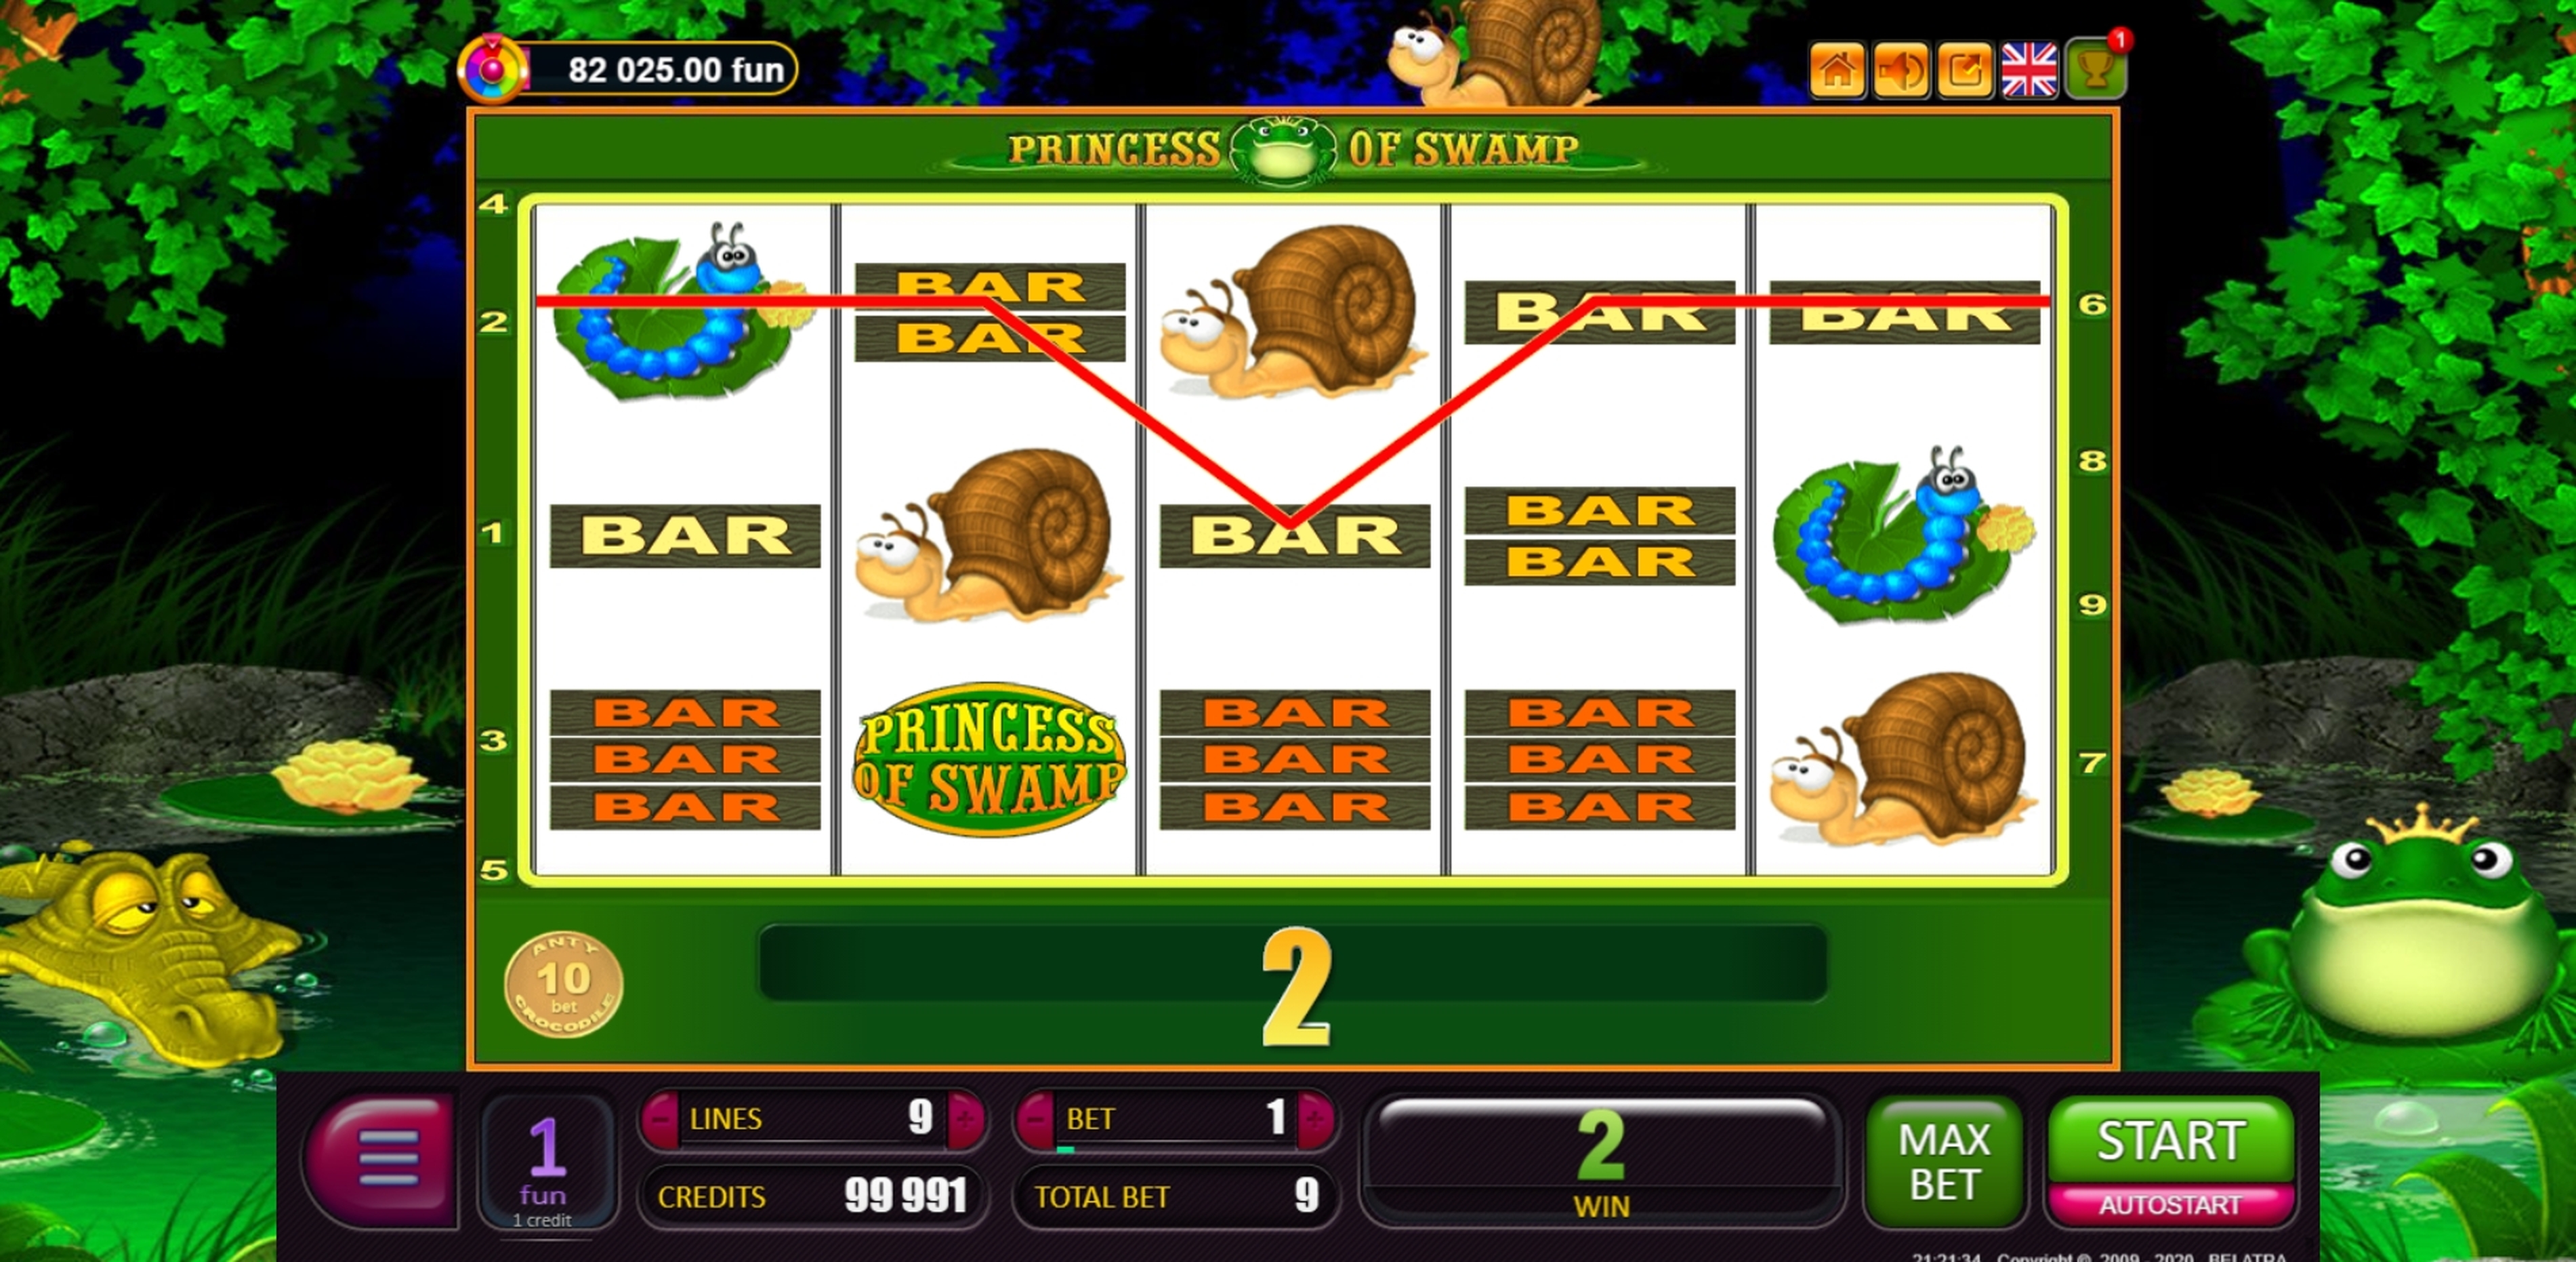 Win Money in Princess of Swamp Free Slot Game by Belatra Games